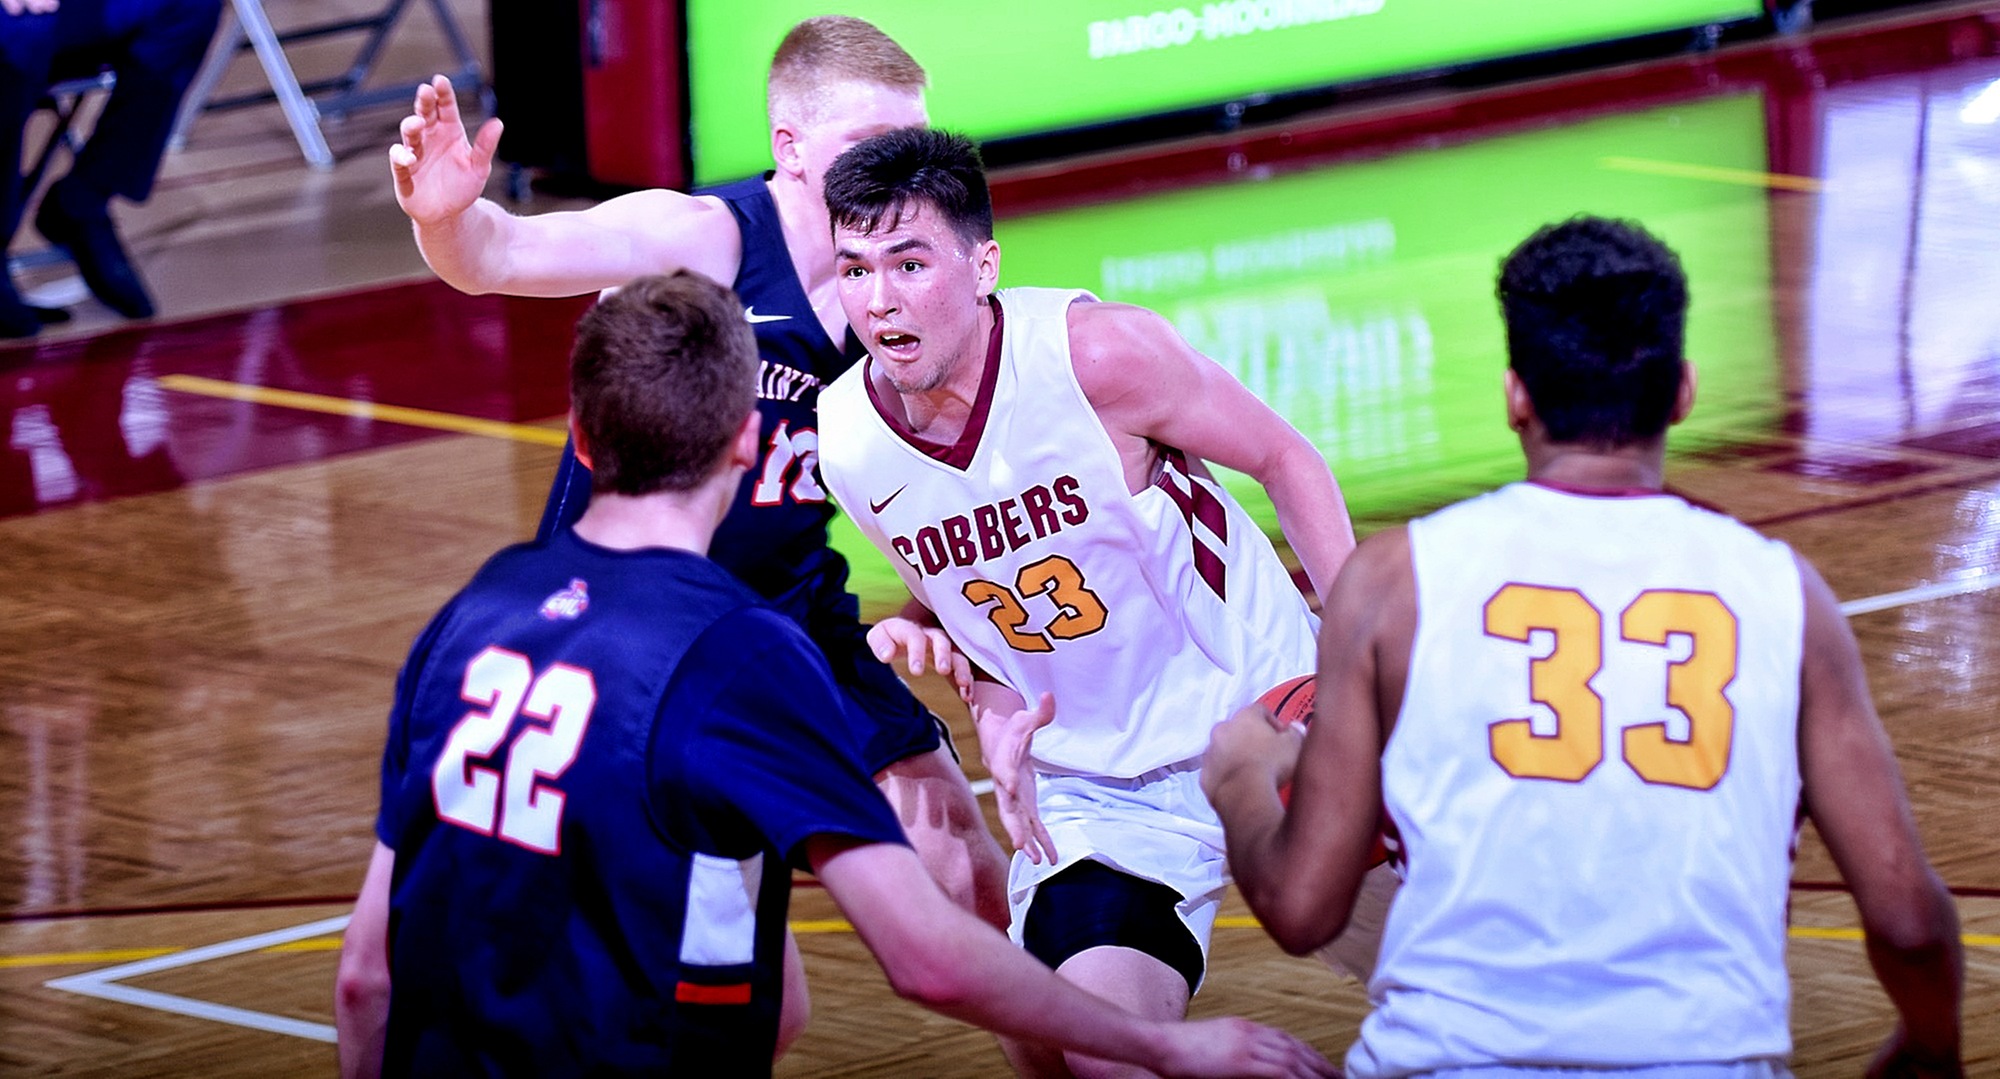 Senior Jordan Davis drives to the basket in the second half against St. Mary's for two of his team-high 18 points in the Cobbers' 67-60 win.